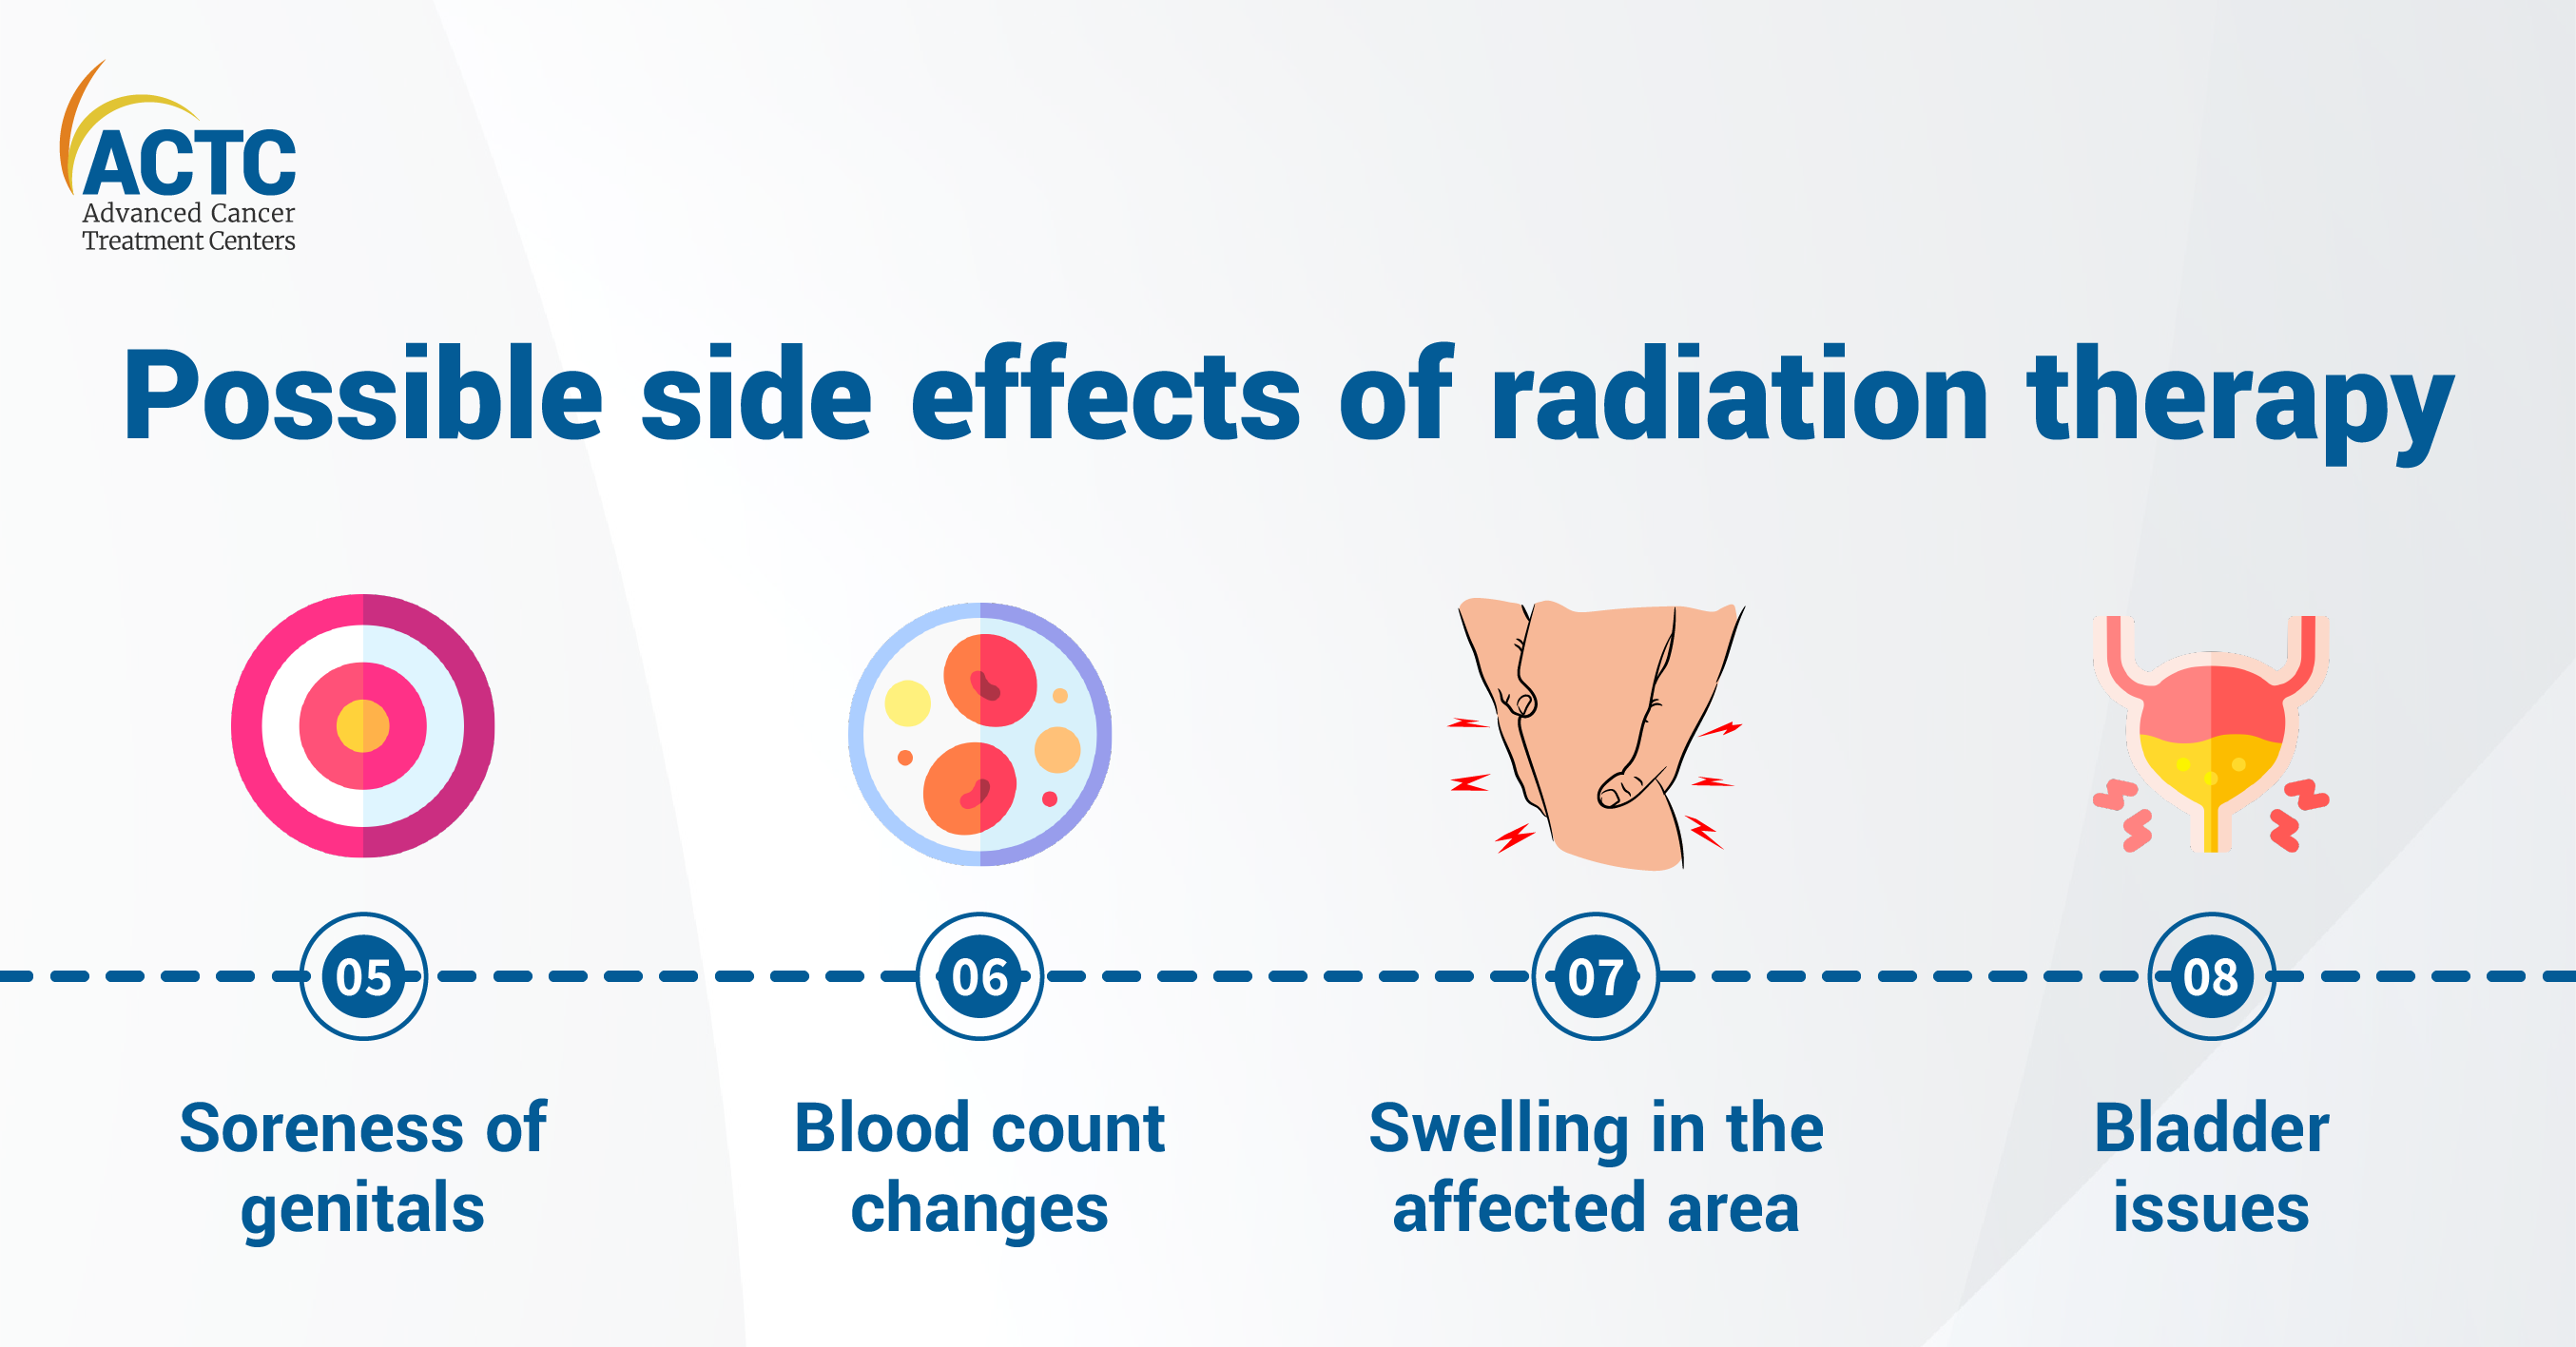 What are the common side effects of radiation therapy?